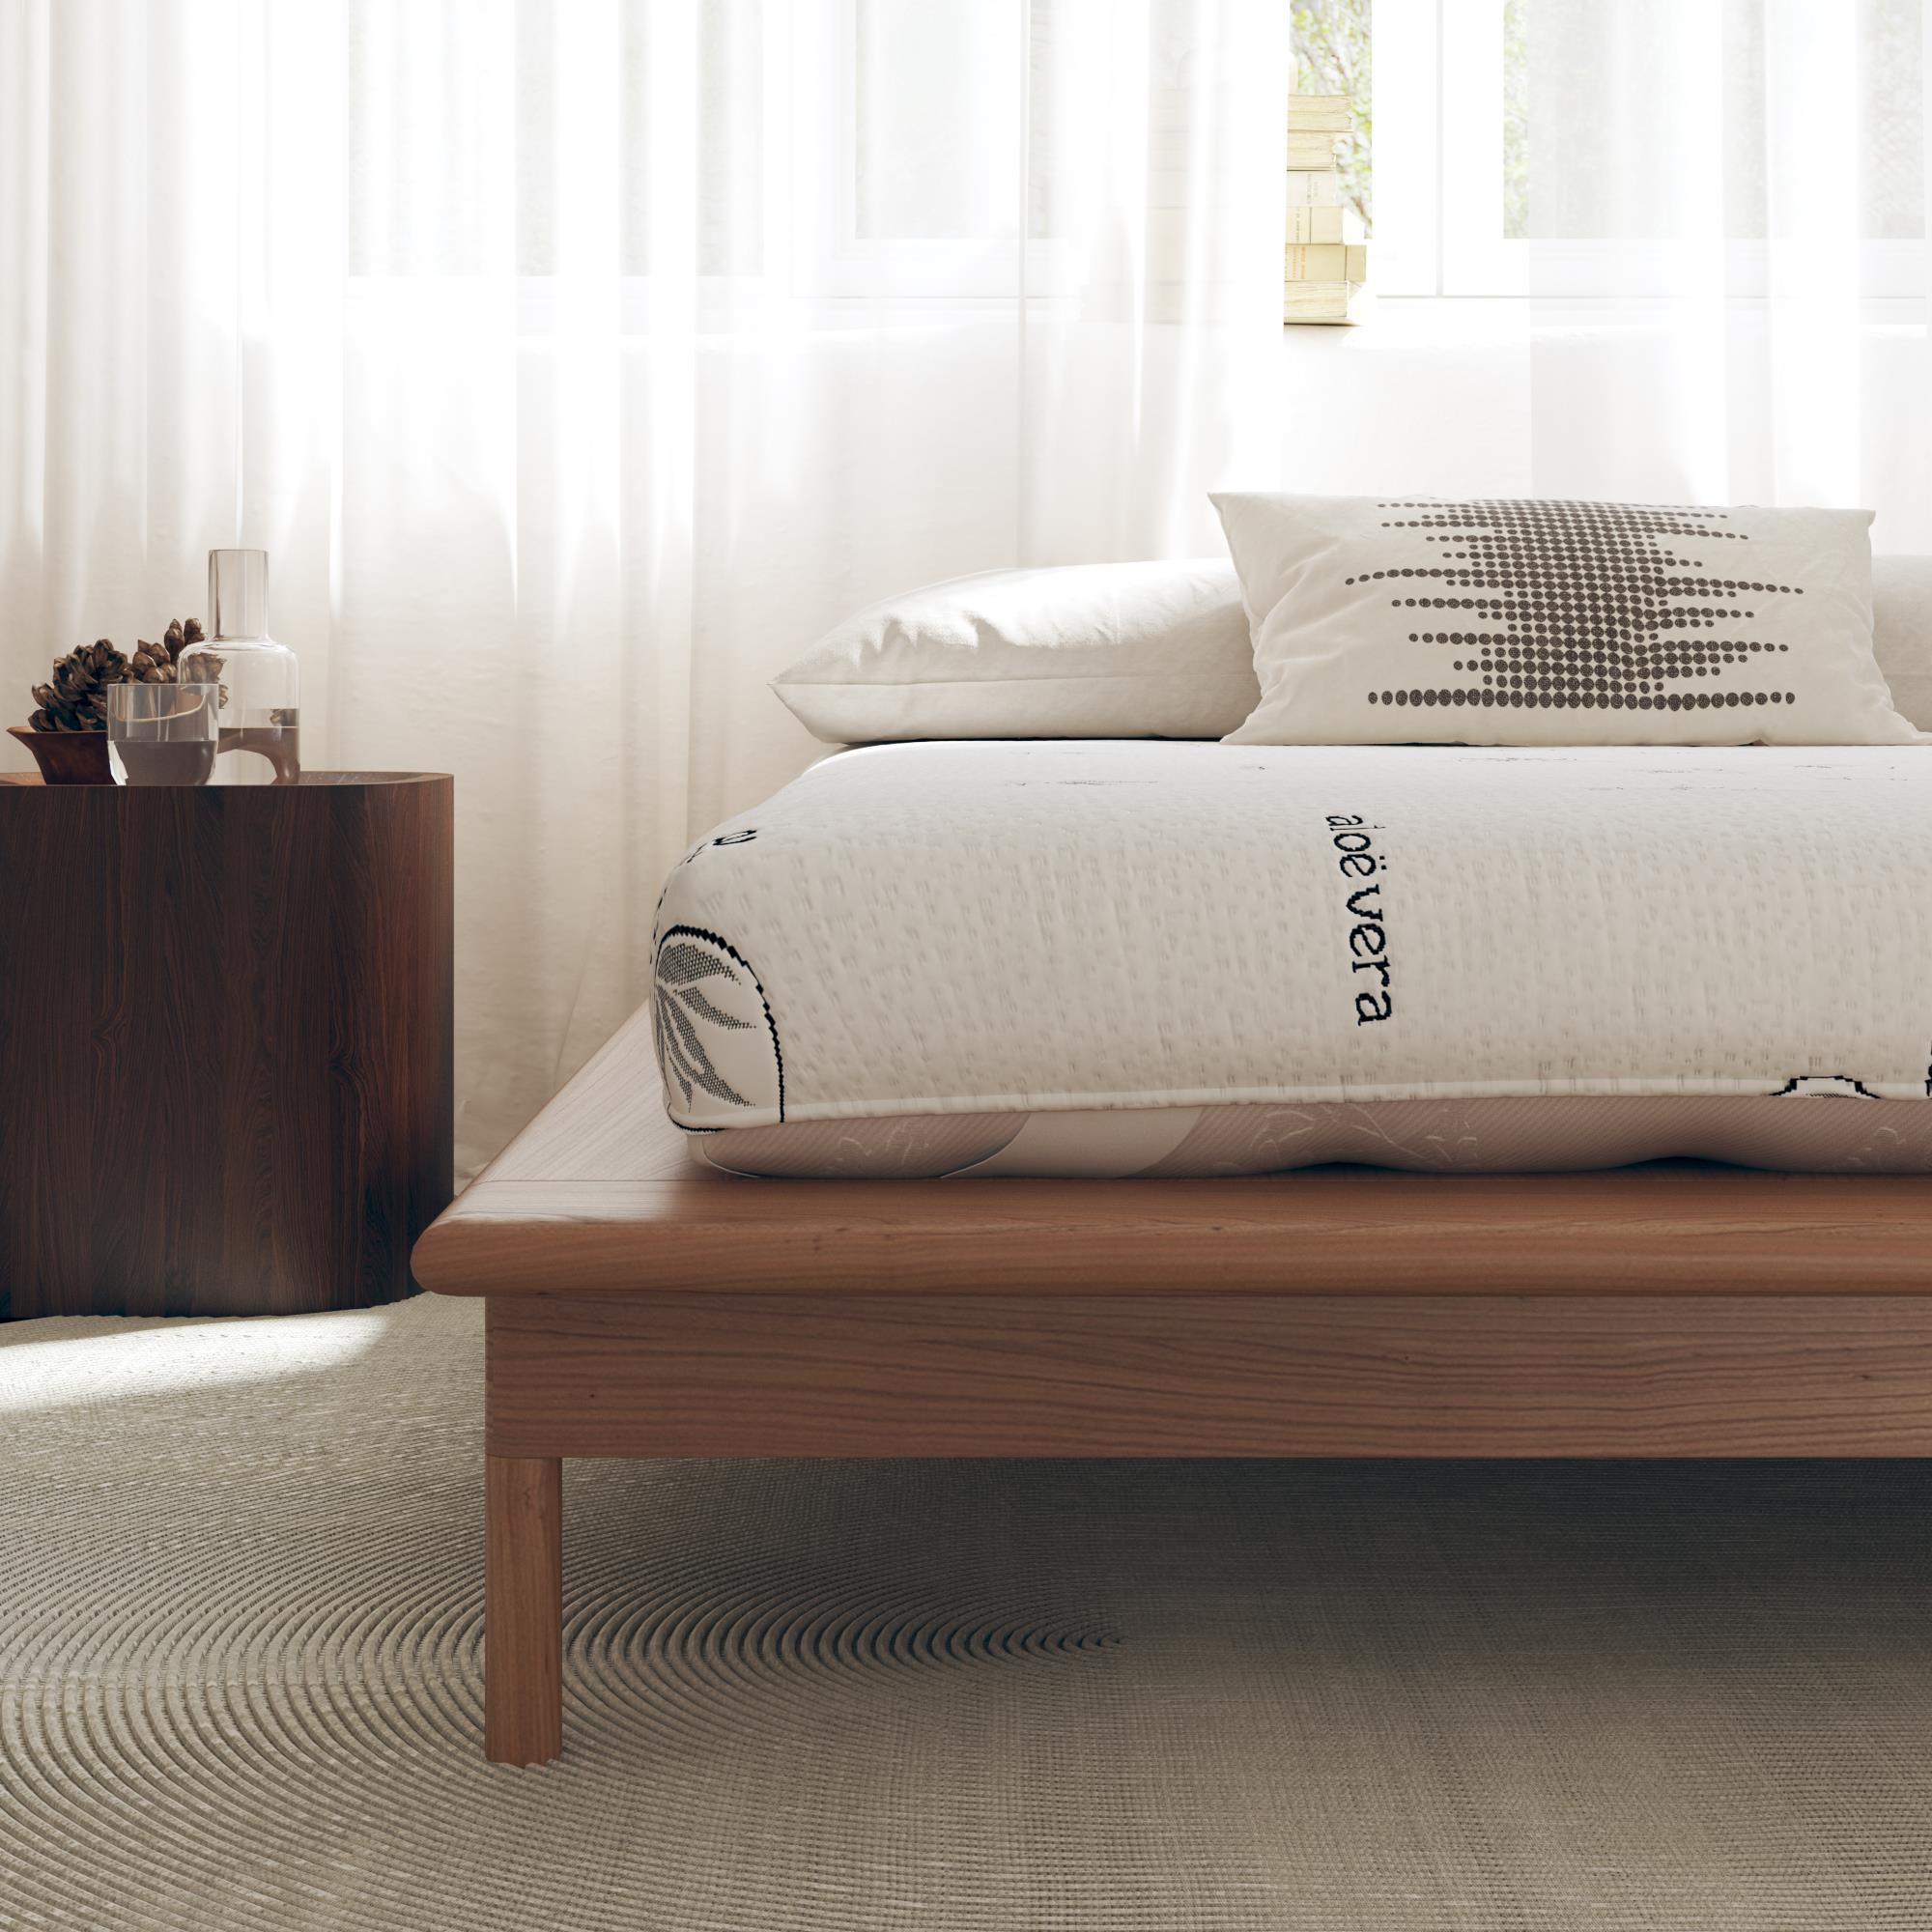 Signature Sleep Honest Elements 7 Natural Wool Mattress with Organic Cotton and Micro Coils, Full Size, [bed_full] - image 1 of 23